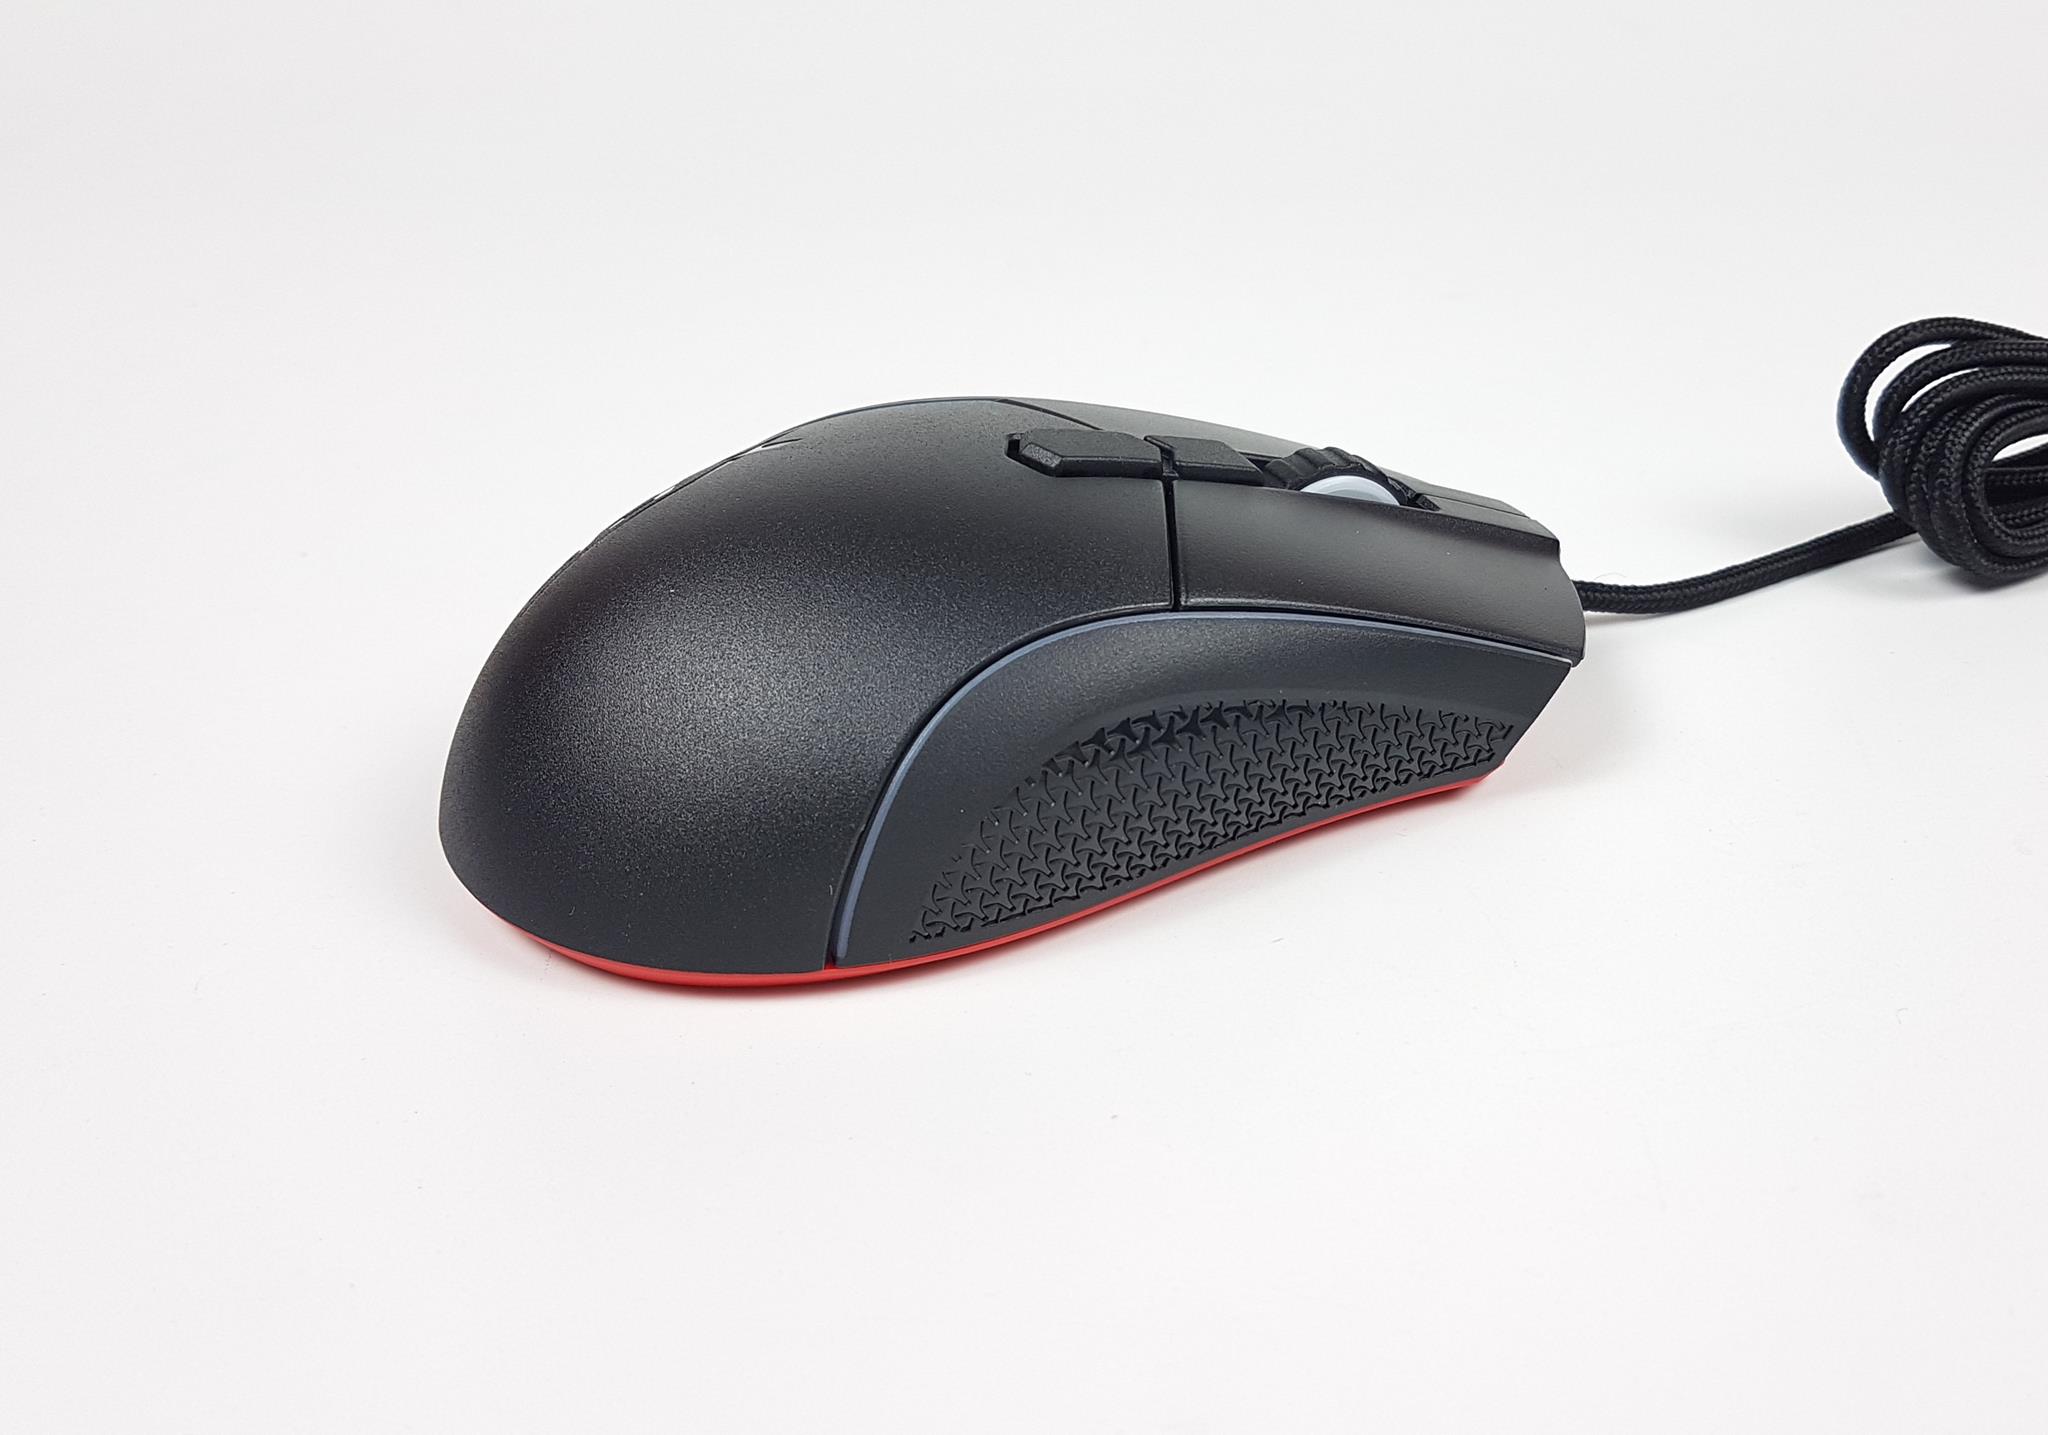 XPG Gaming Mouse Front look